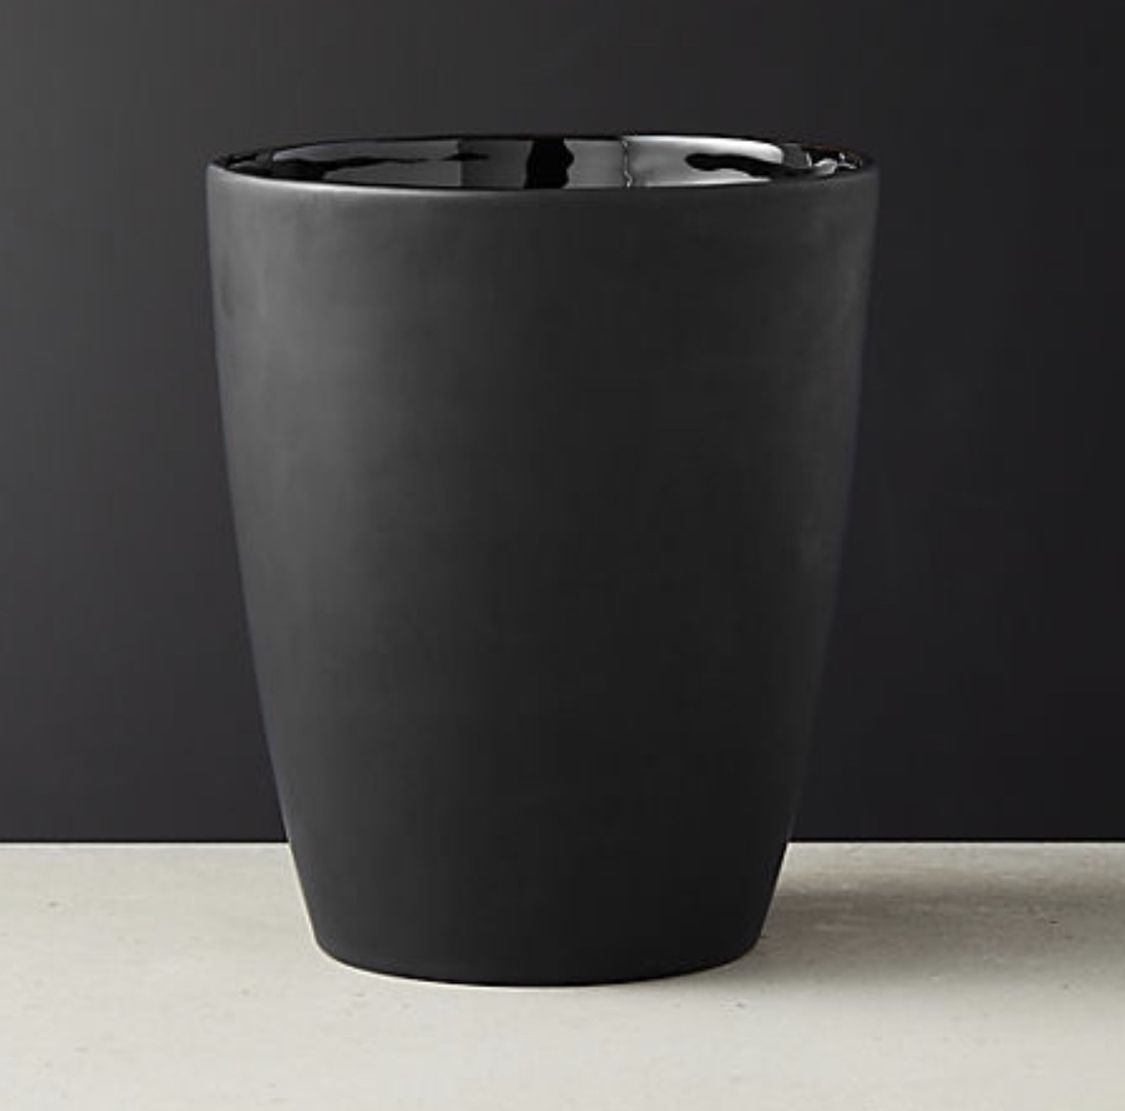 CB2 Rubber Coated Black Wastecan / Trashcan